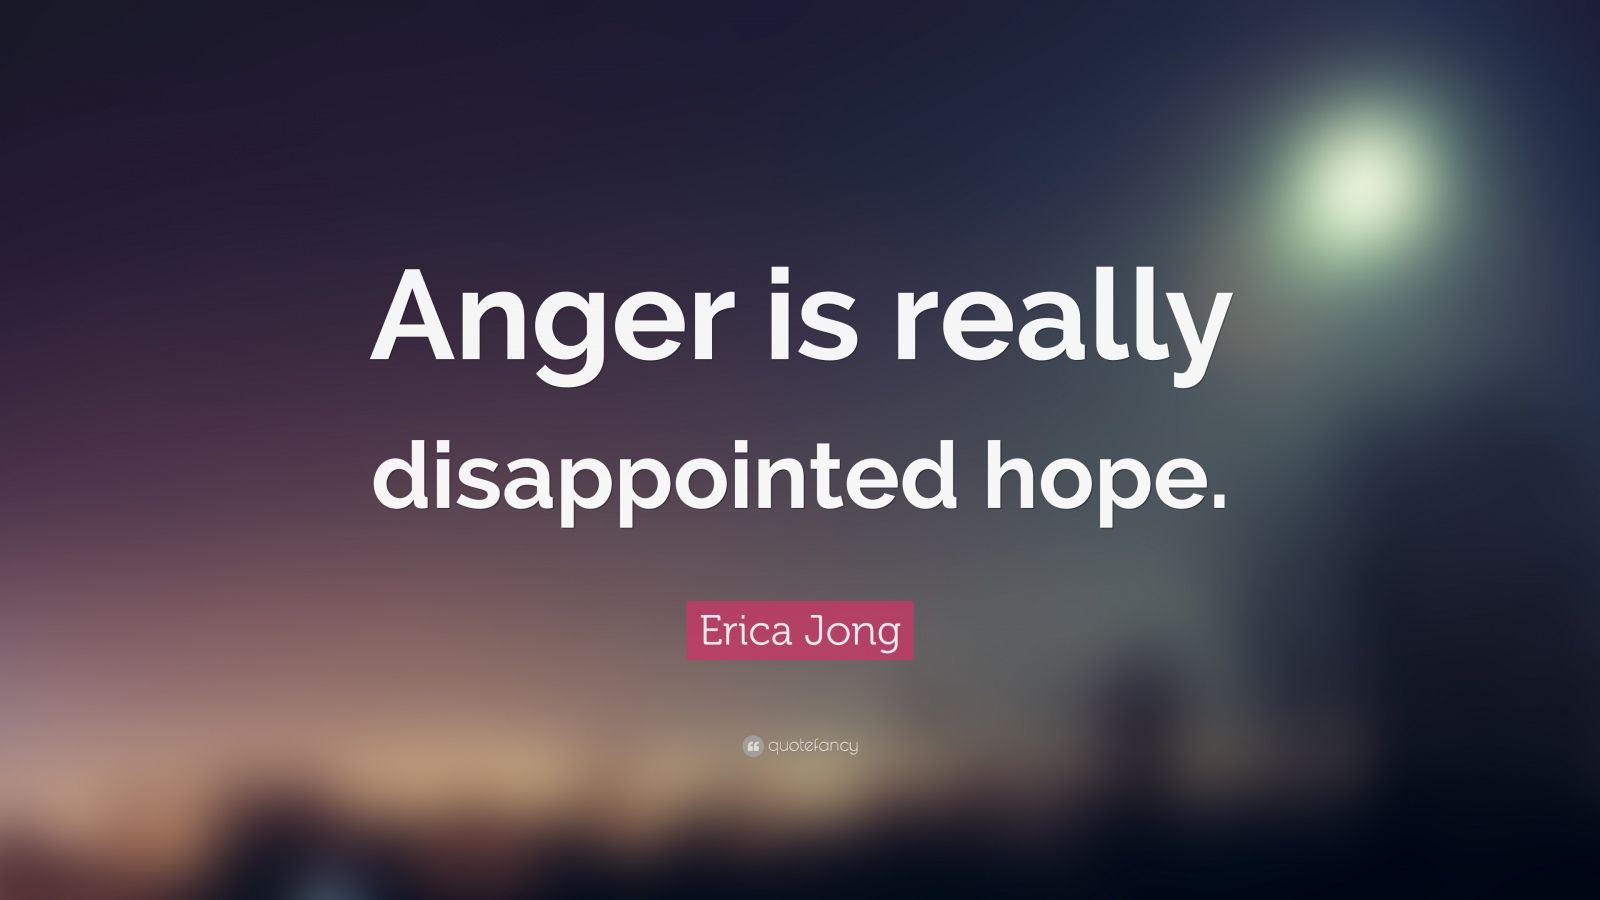 Top 40 Anger Quotes | 2021 Edition | Free Images - QuoteFancy